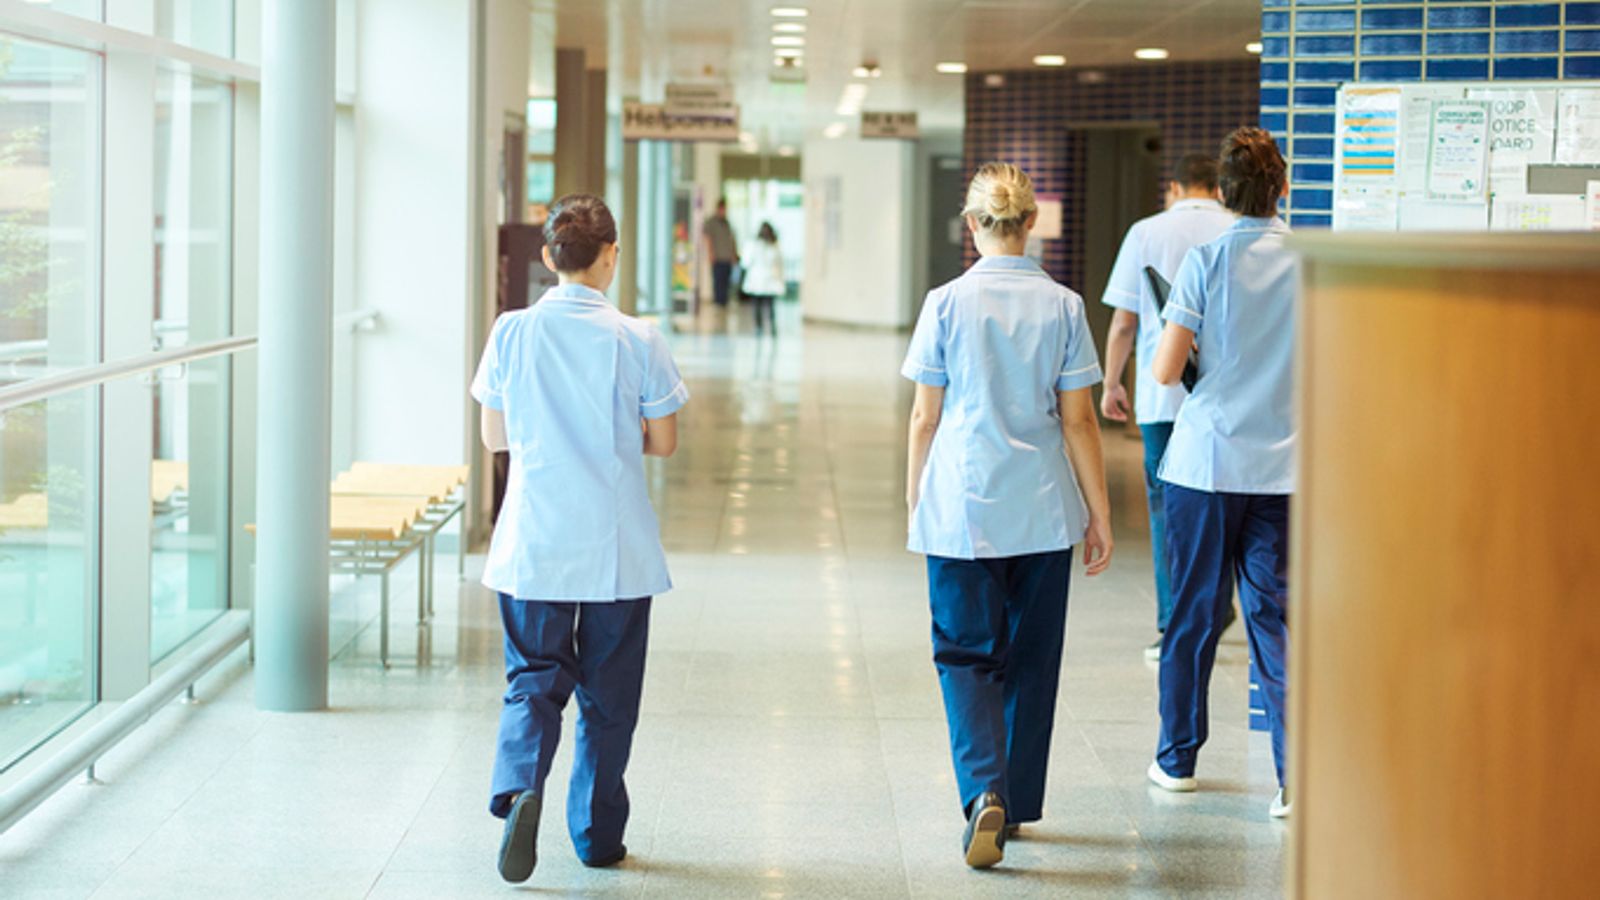 Nurses are working the equivalent of one day a week for nothing, research says